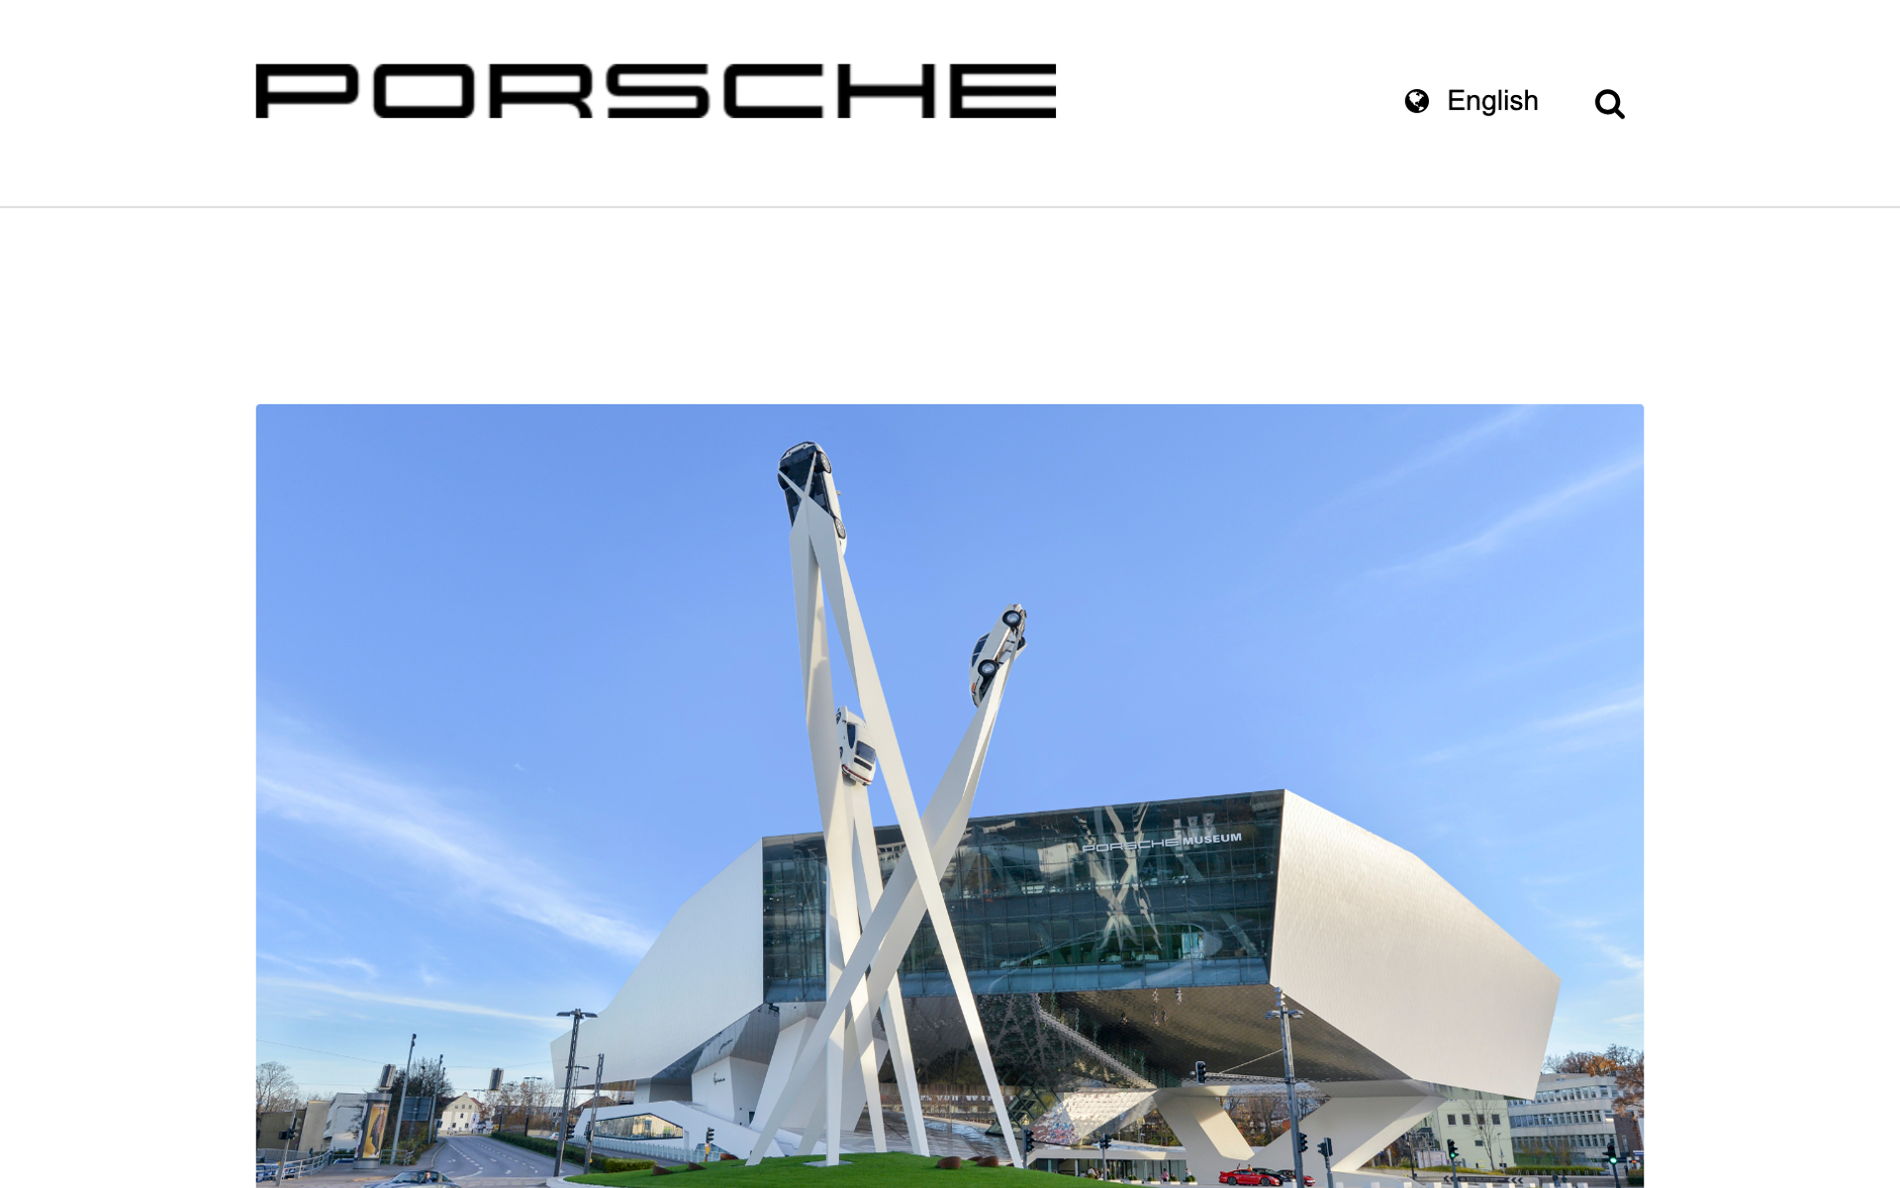 Show, don't tell: Porsche uses photographs to capture your imagination